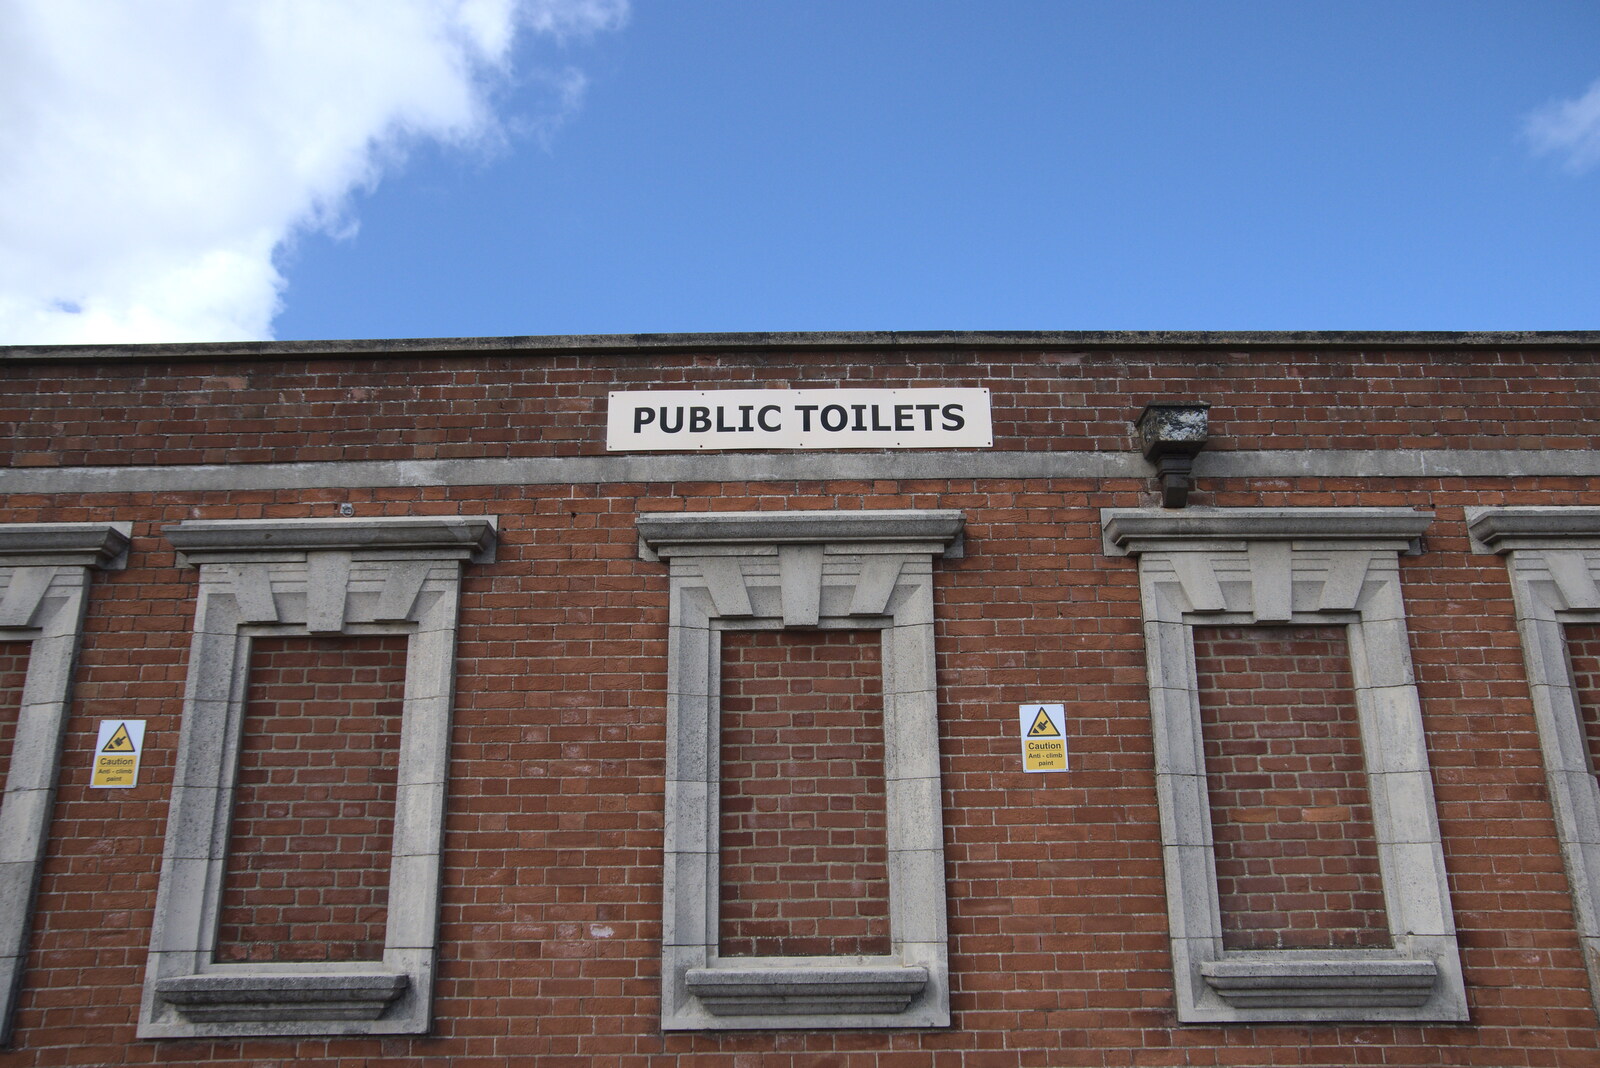 Even the public bogs are impressive from Faded Seaside Glamour: A Weekend in Great Yarmouth, Norfolk - 29th May 2022